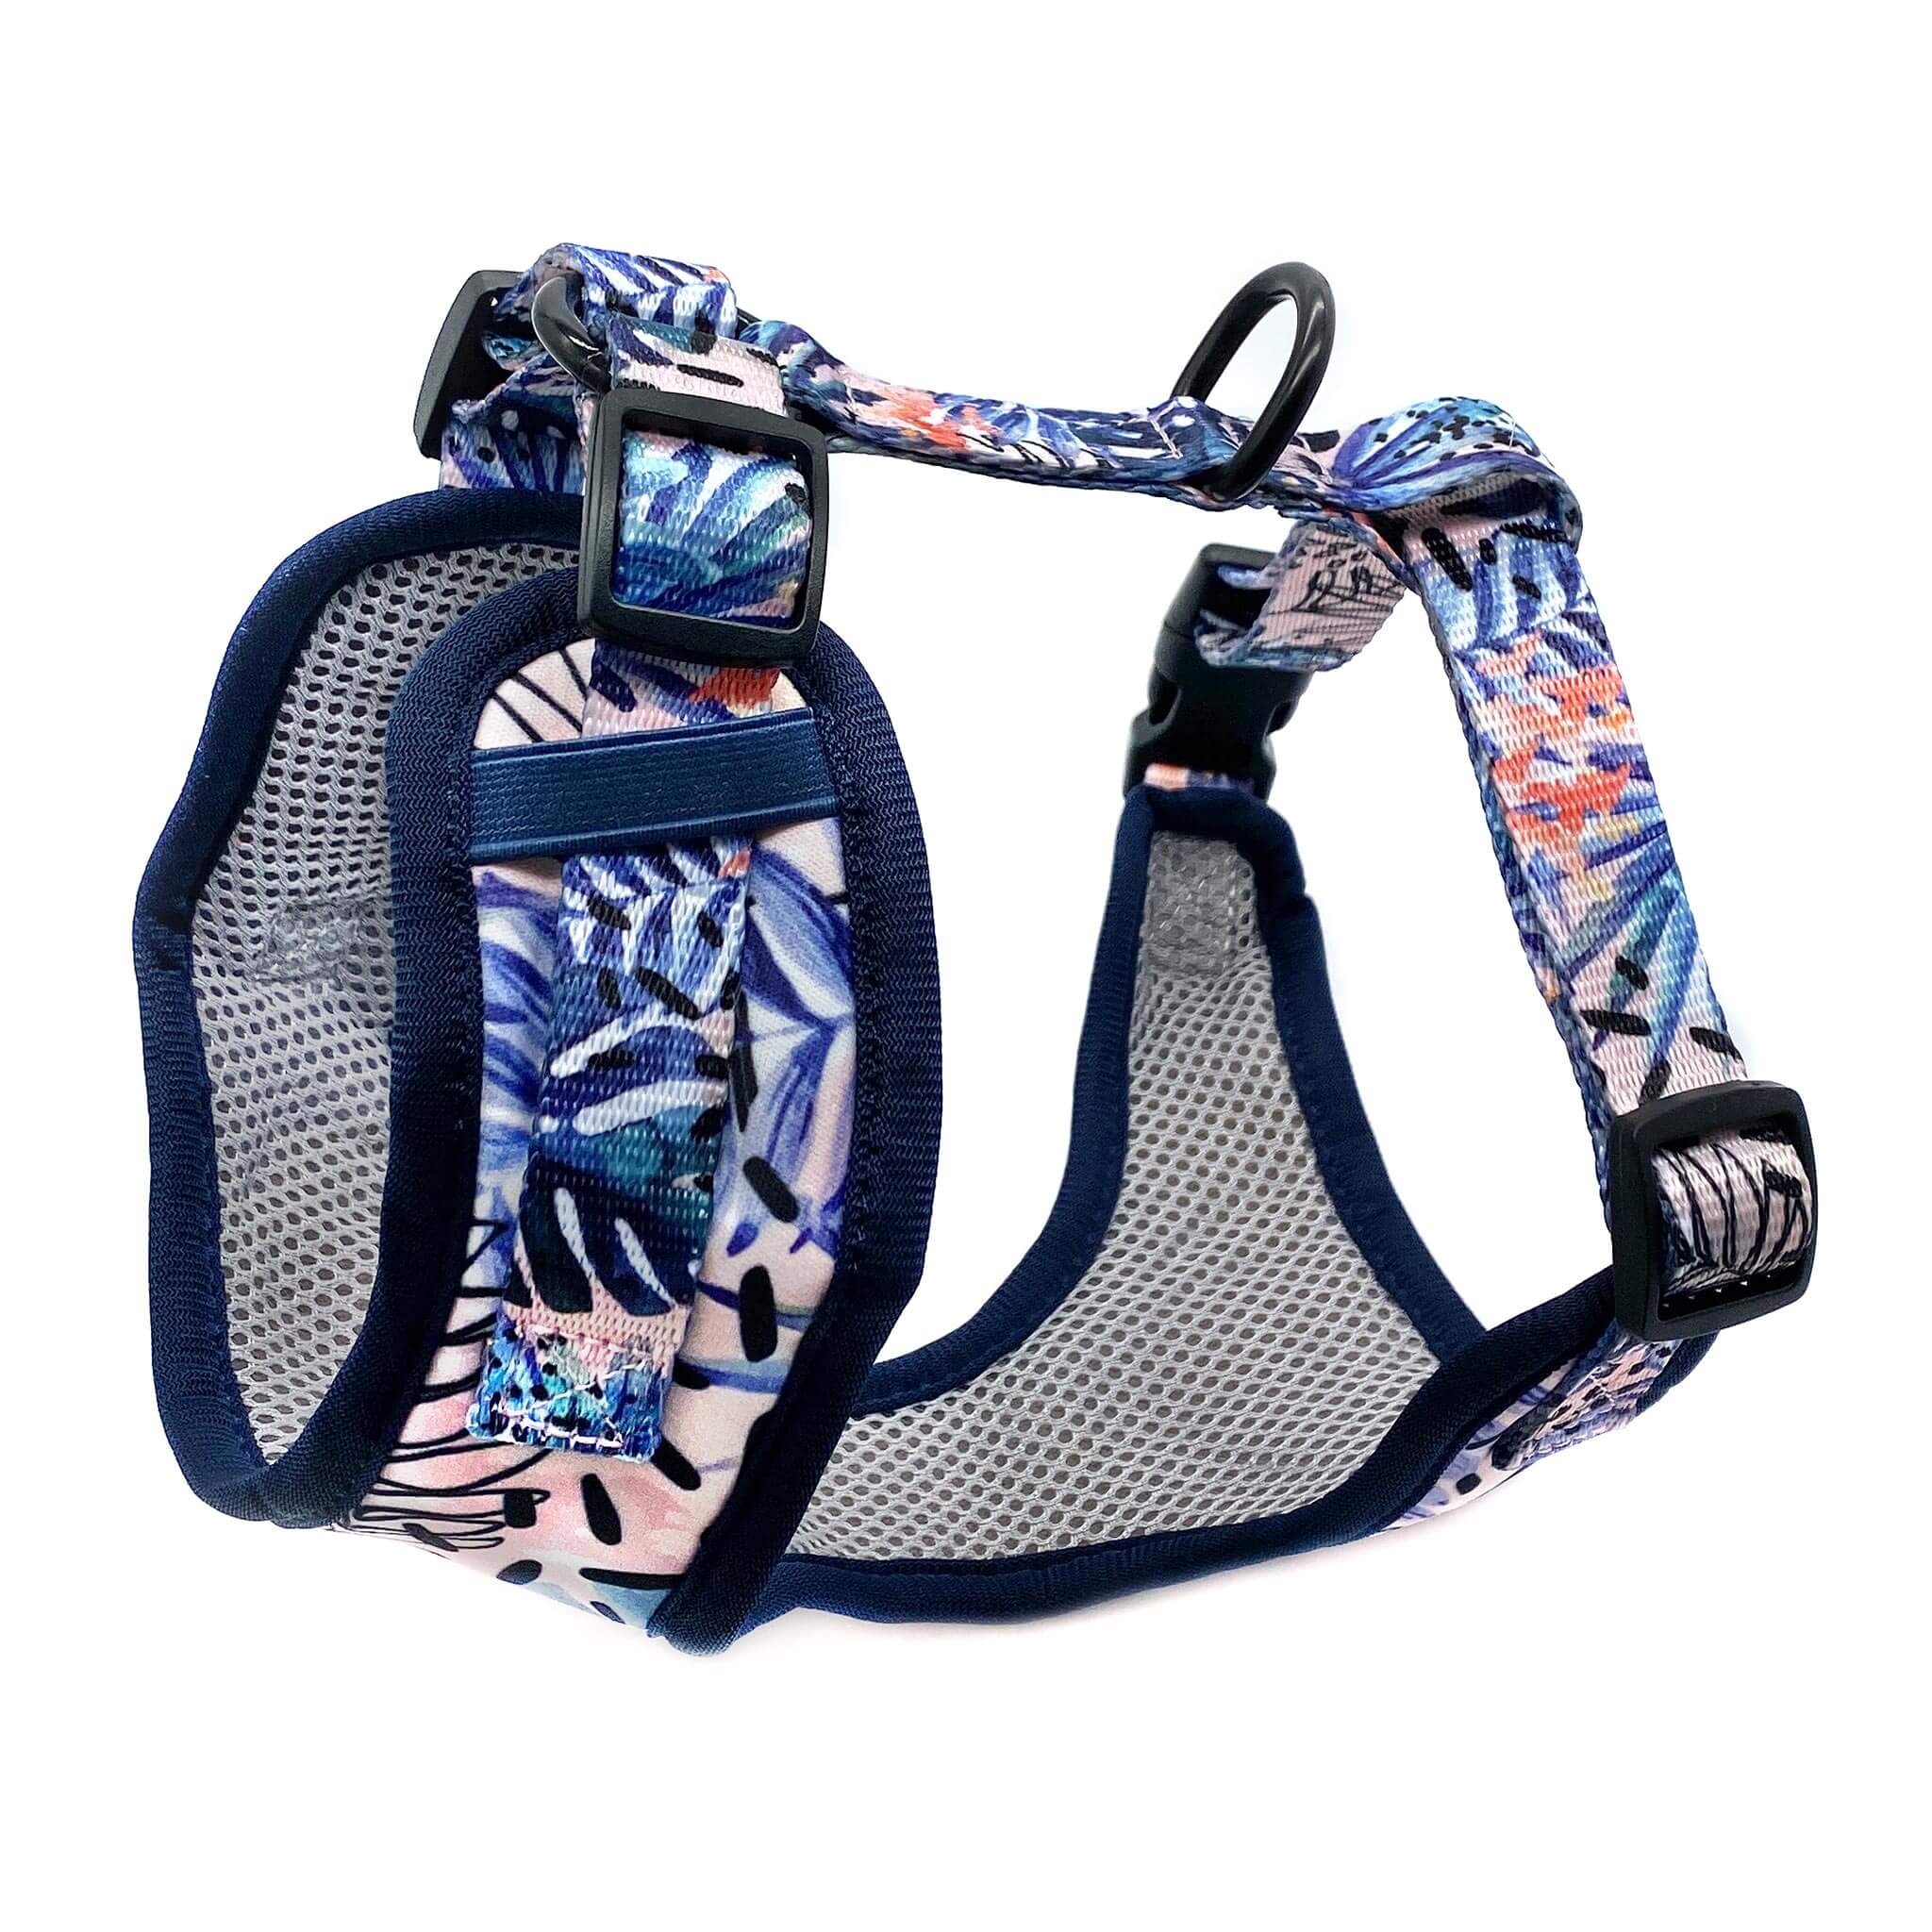 Side view of Pipco Pets adjustable dog harness with Tropic Fronds tropical leaves print pattern in blue